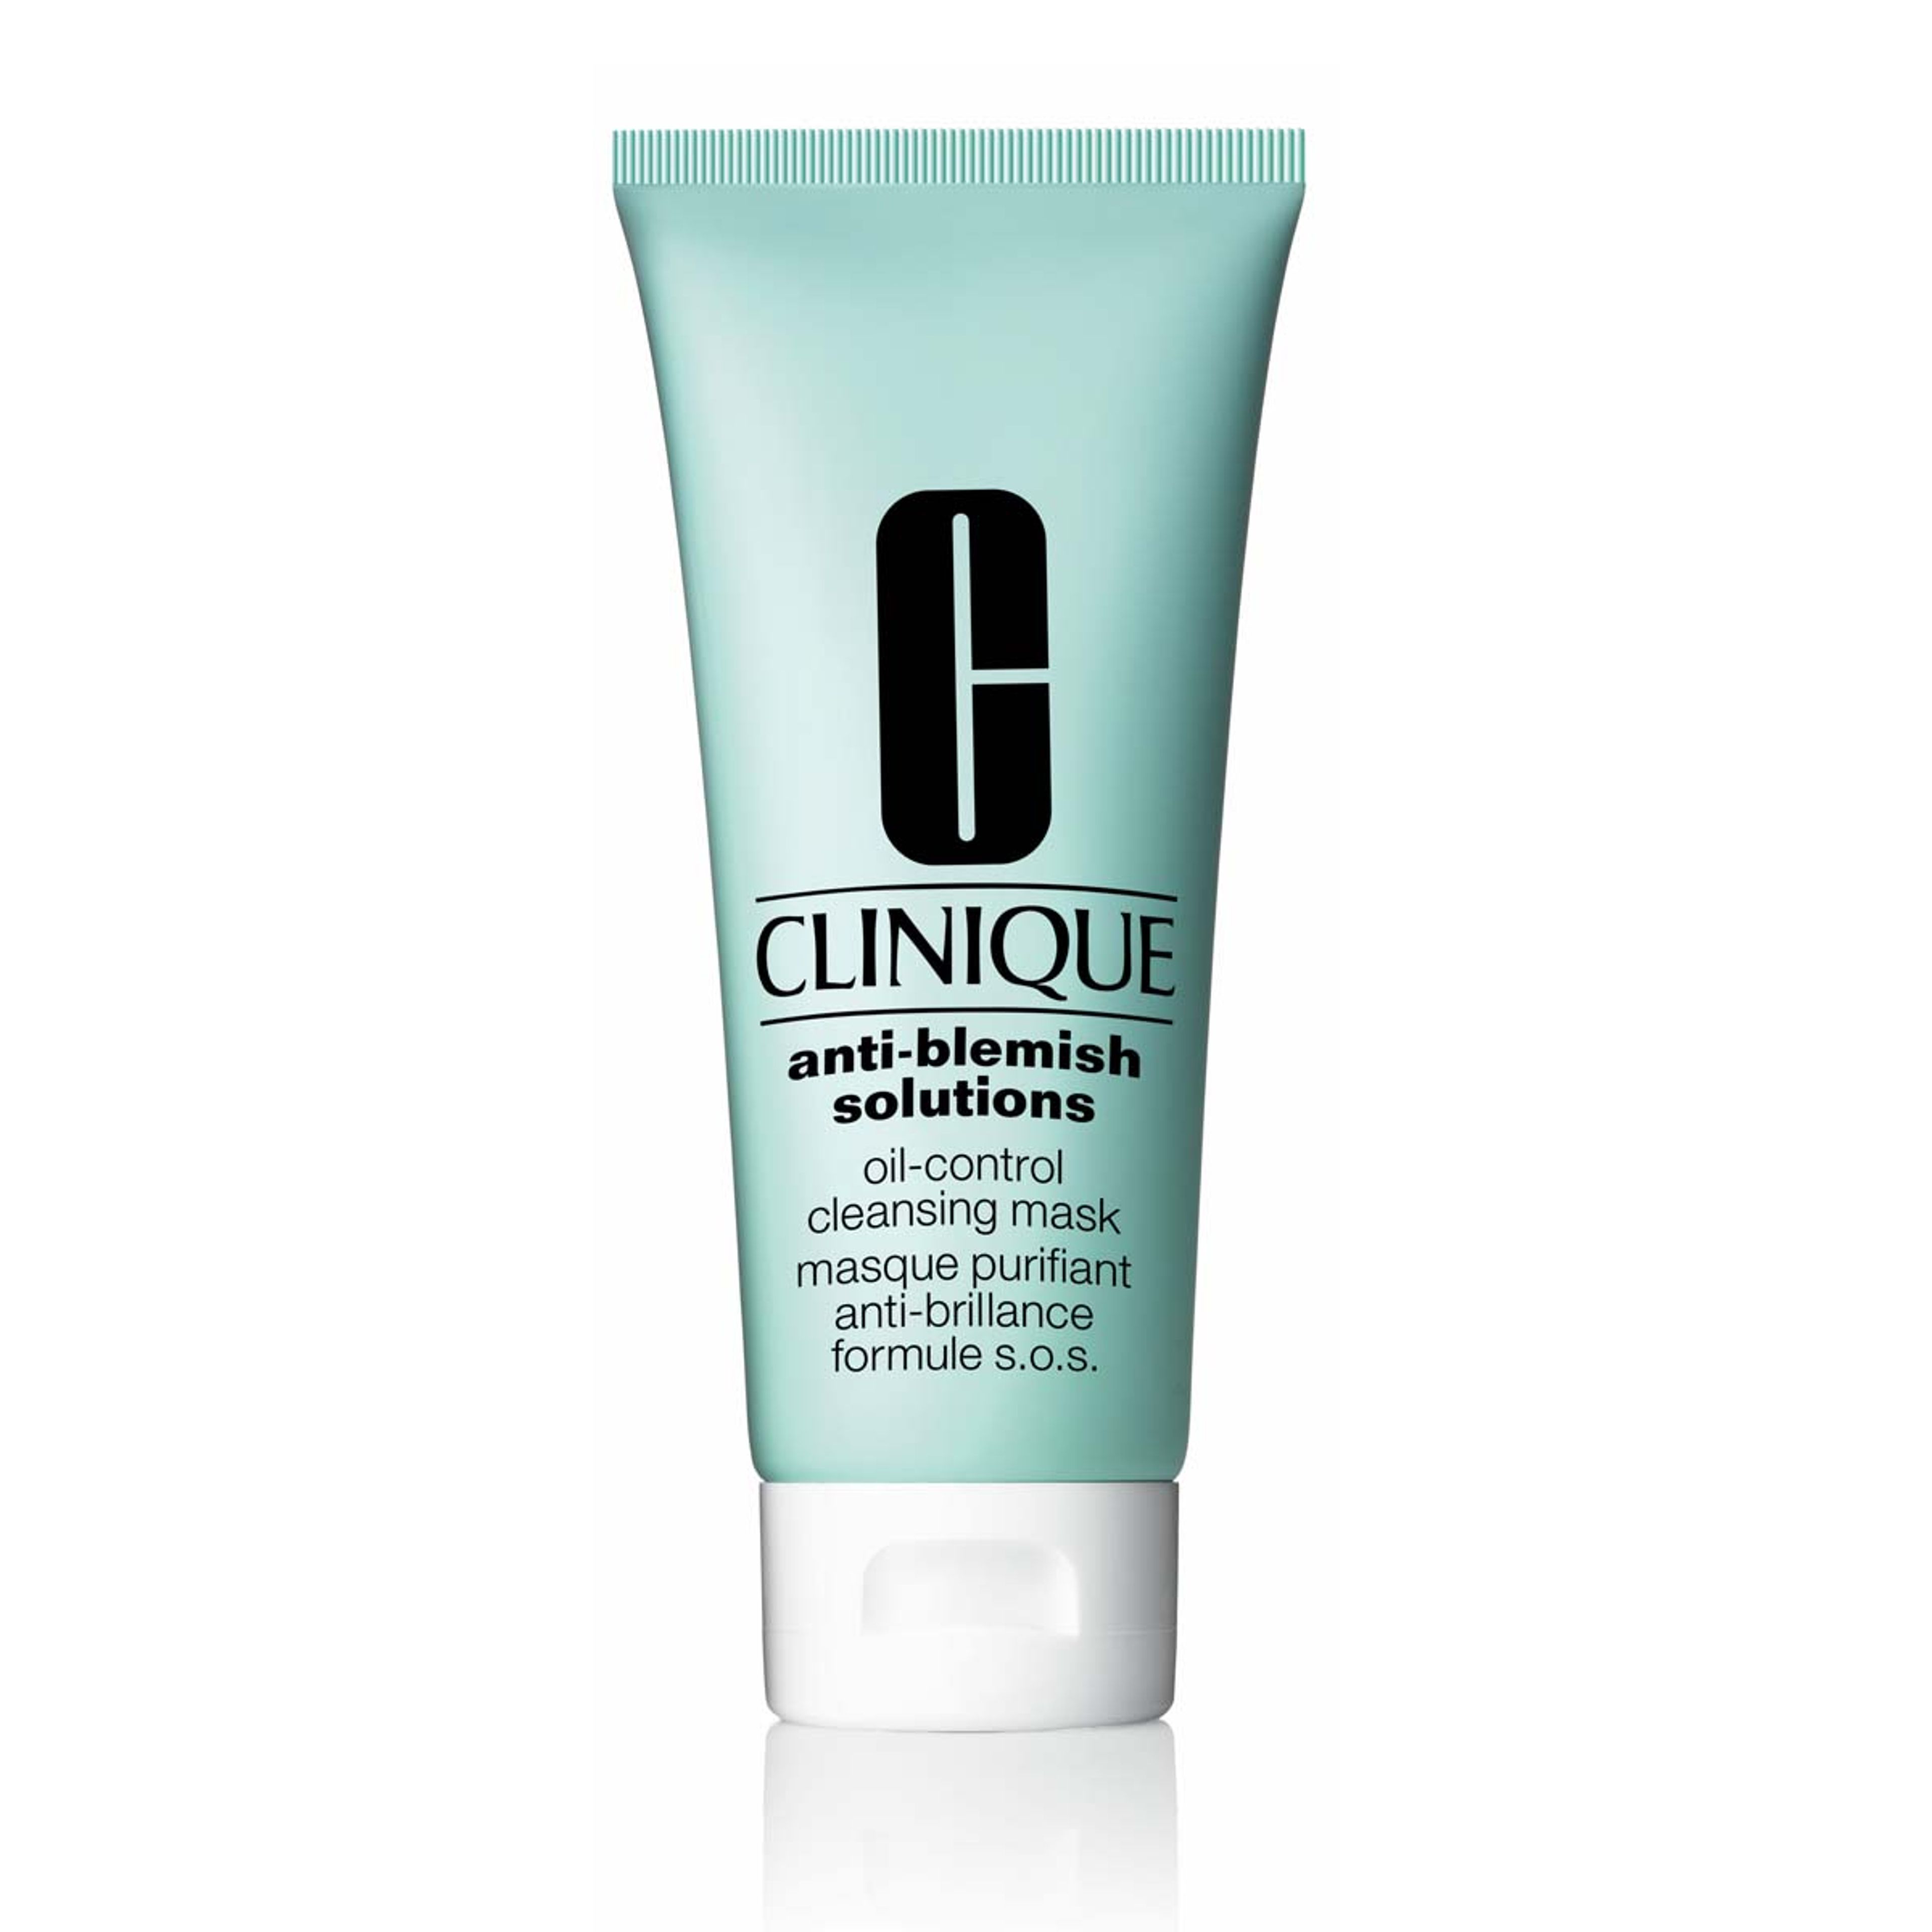 Clinique Anti Blemish Solutions Oil Control Cleansing Mask 1